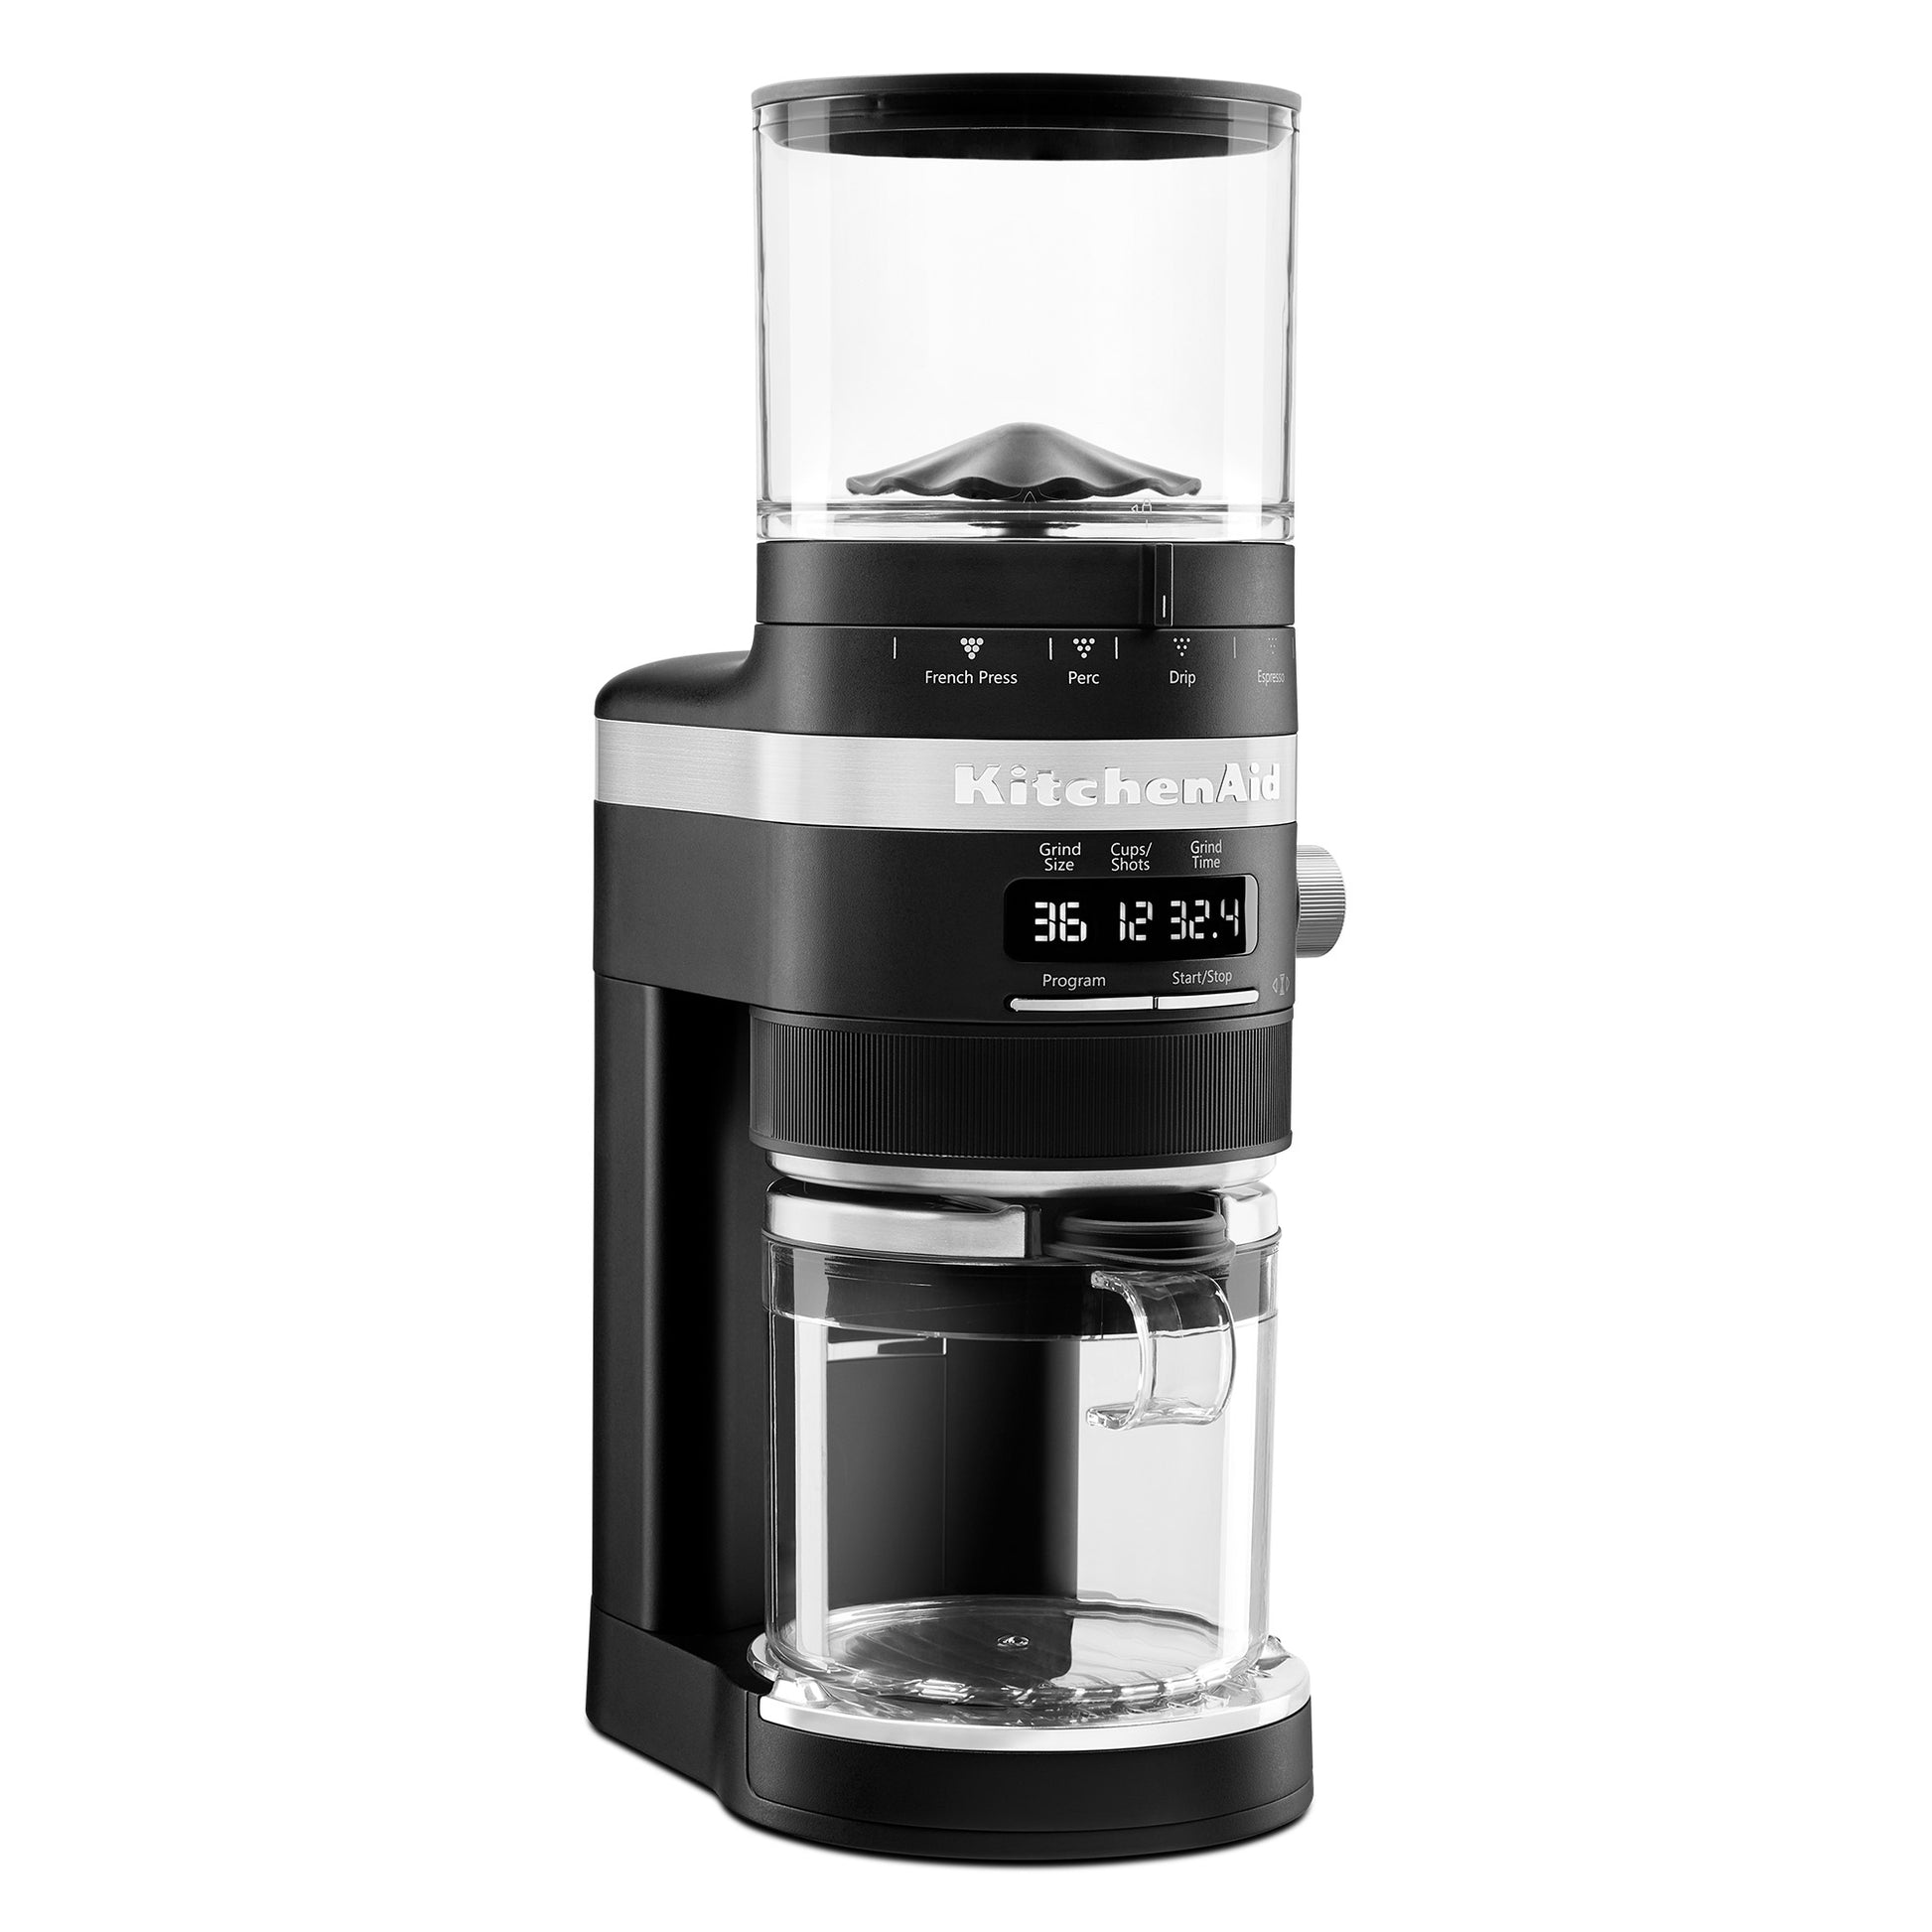 Find the best grinders for French Press coffee here  Gourmet coffee beans,  Best coffee grinder, French press coffee